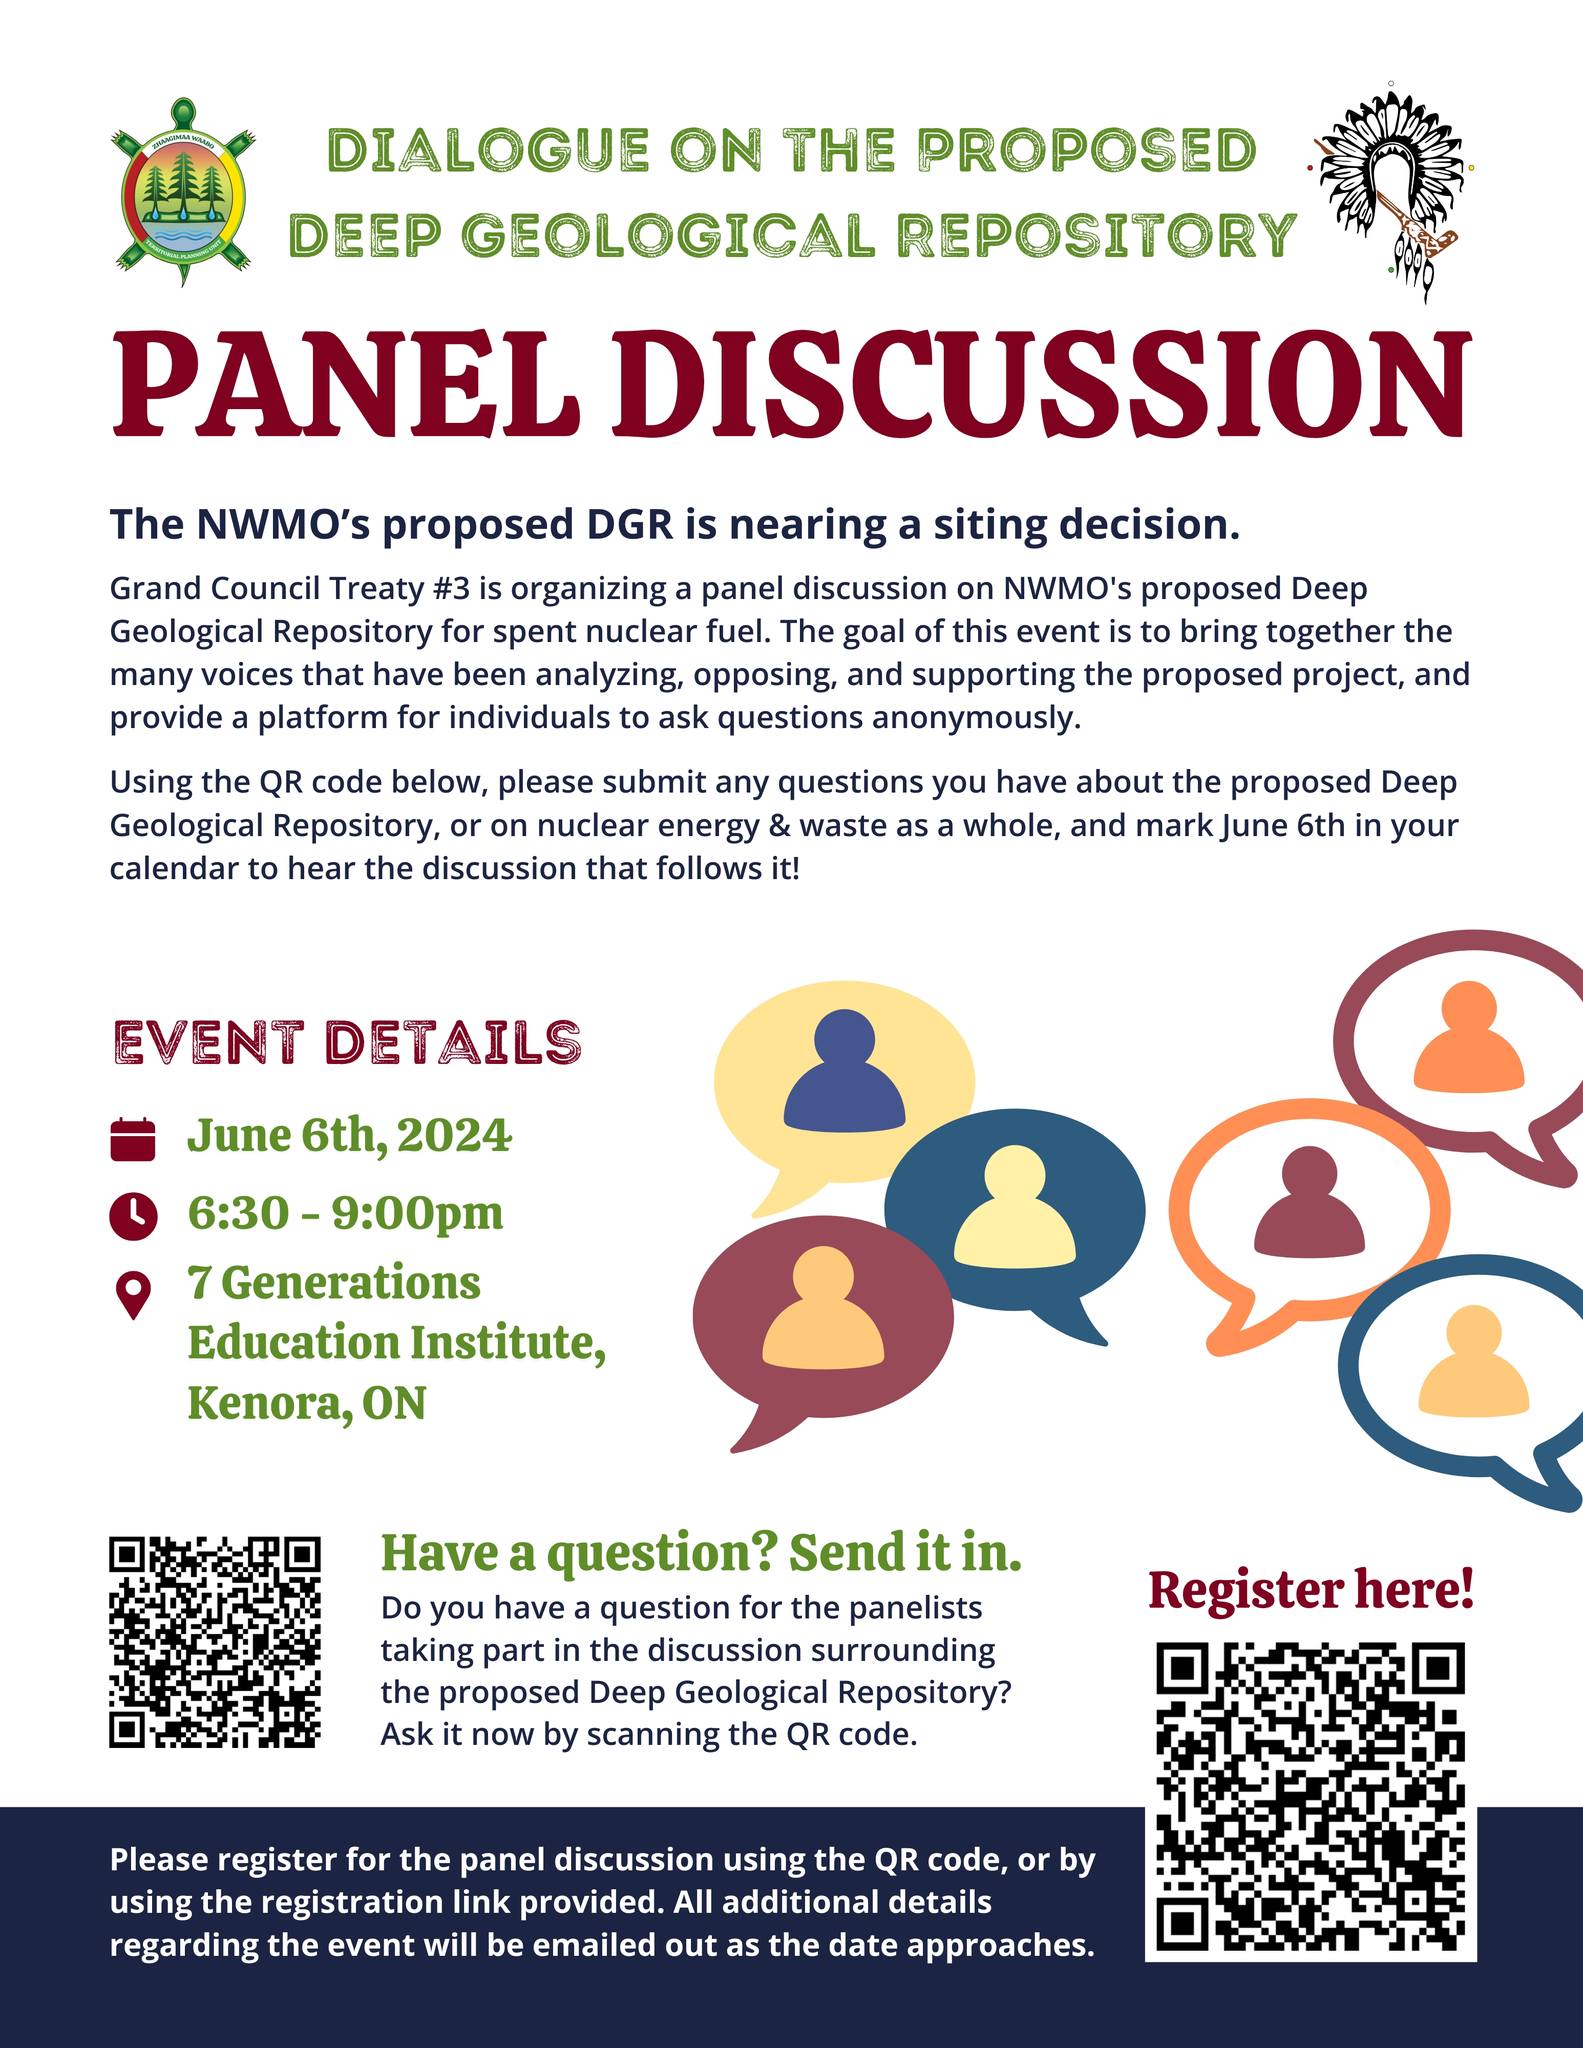 Panel Discussion on the proposed Deep Geological Repository